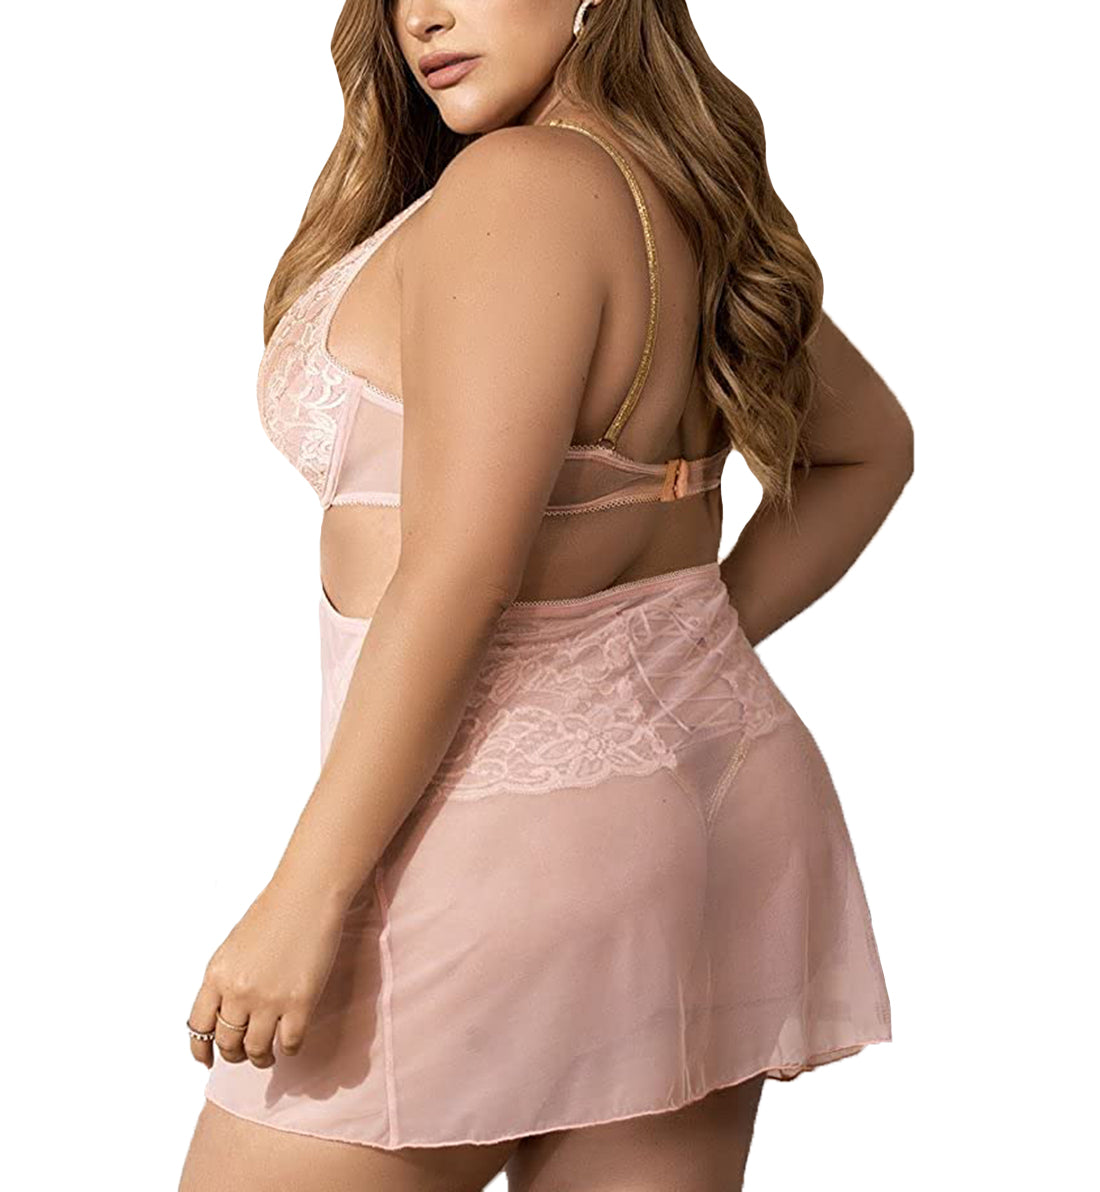 Mapale 2-in-1 Set PLUS: Babydoll, Underwire Bra, Lace-Up Back Thong (7373X),1X/2X,Rose - Rose,1X/2X